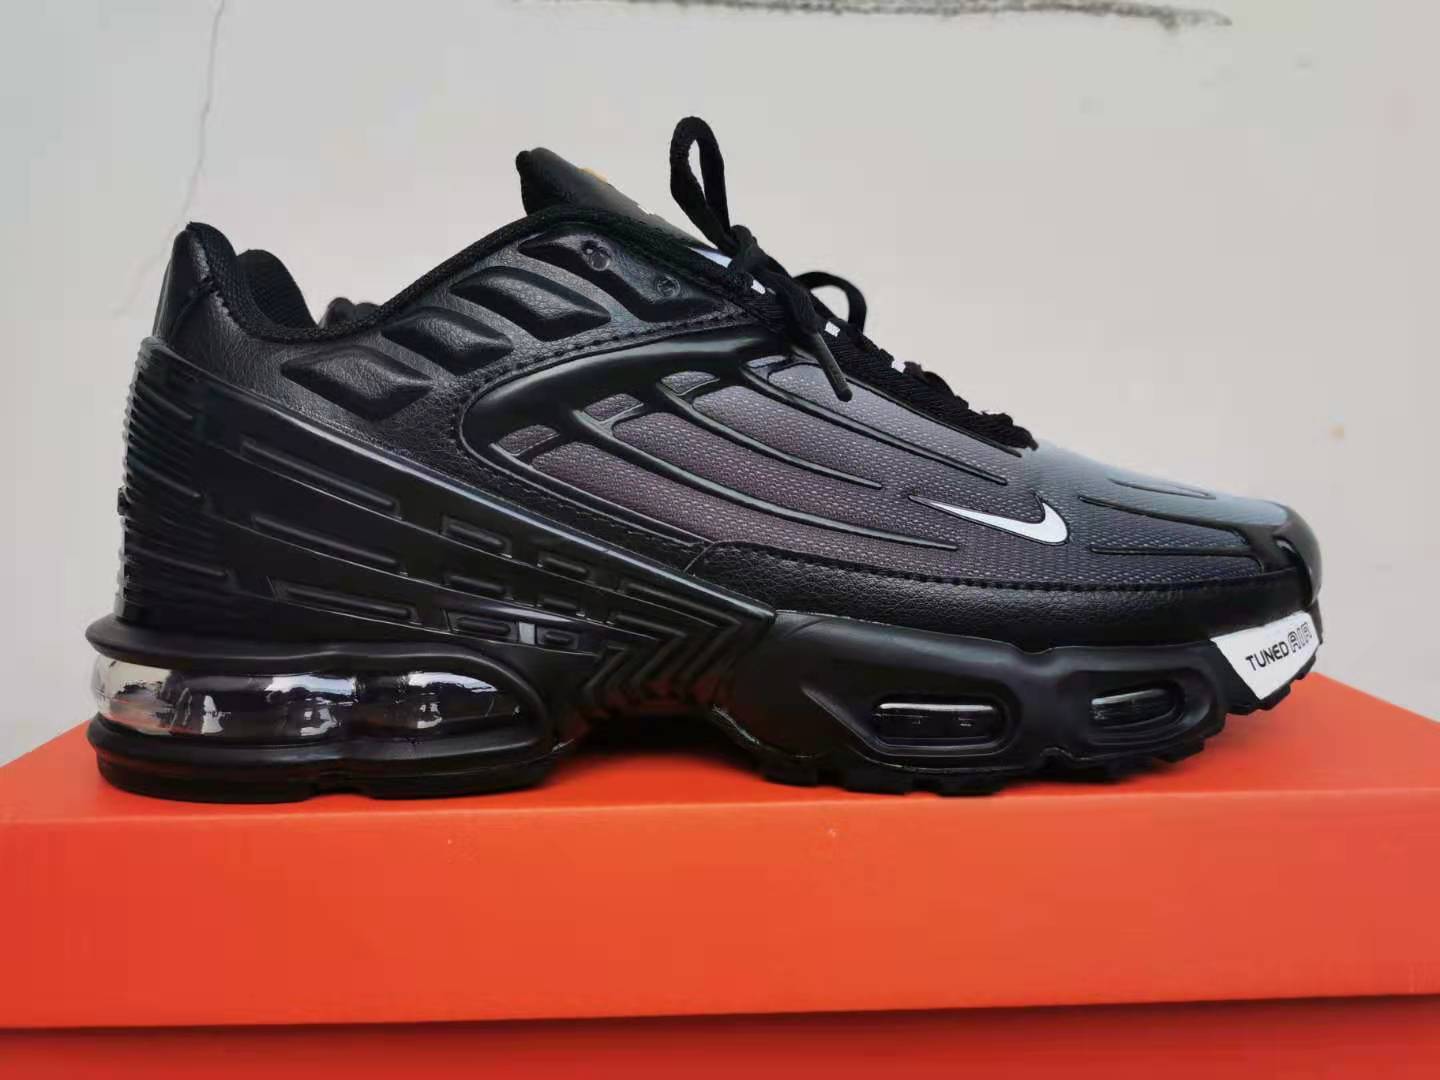 Men's Hot sale Running weapon Air Max TN Shoes 057